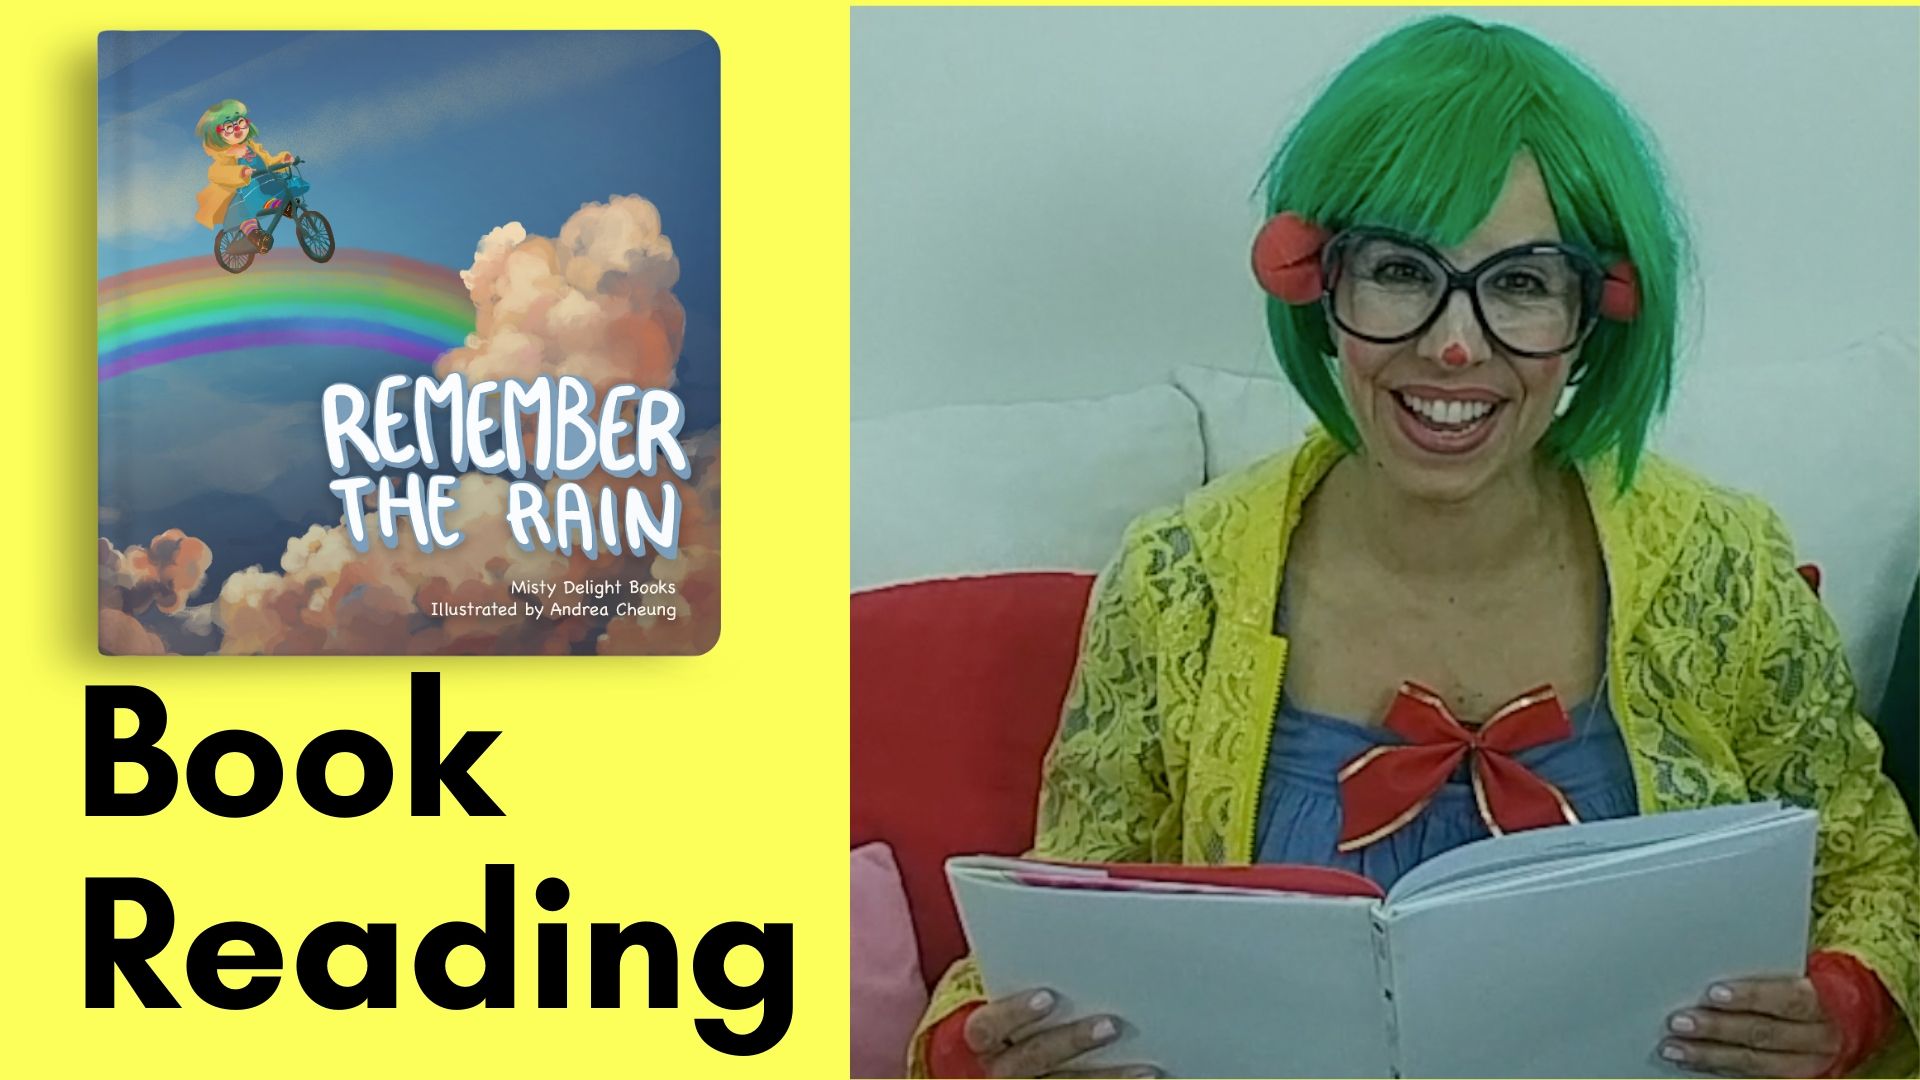 Remeber the rain- Book Reading by Misty Delight